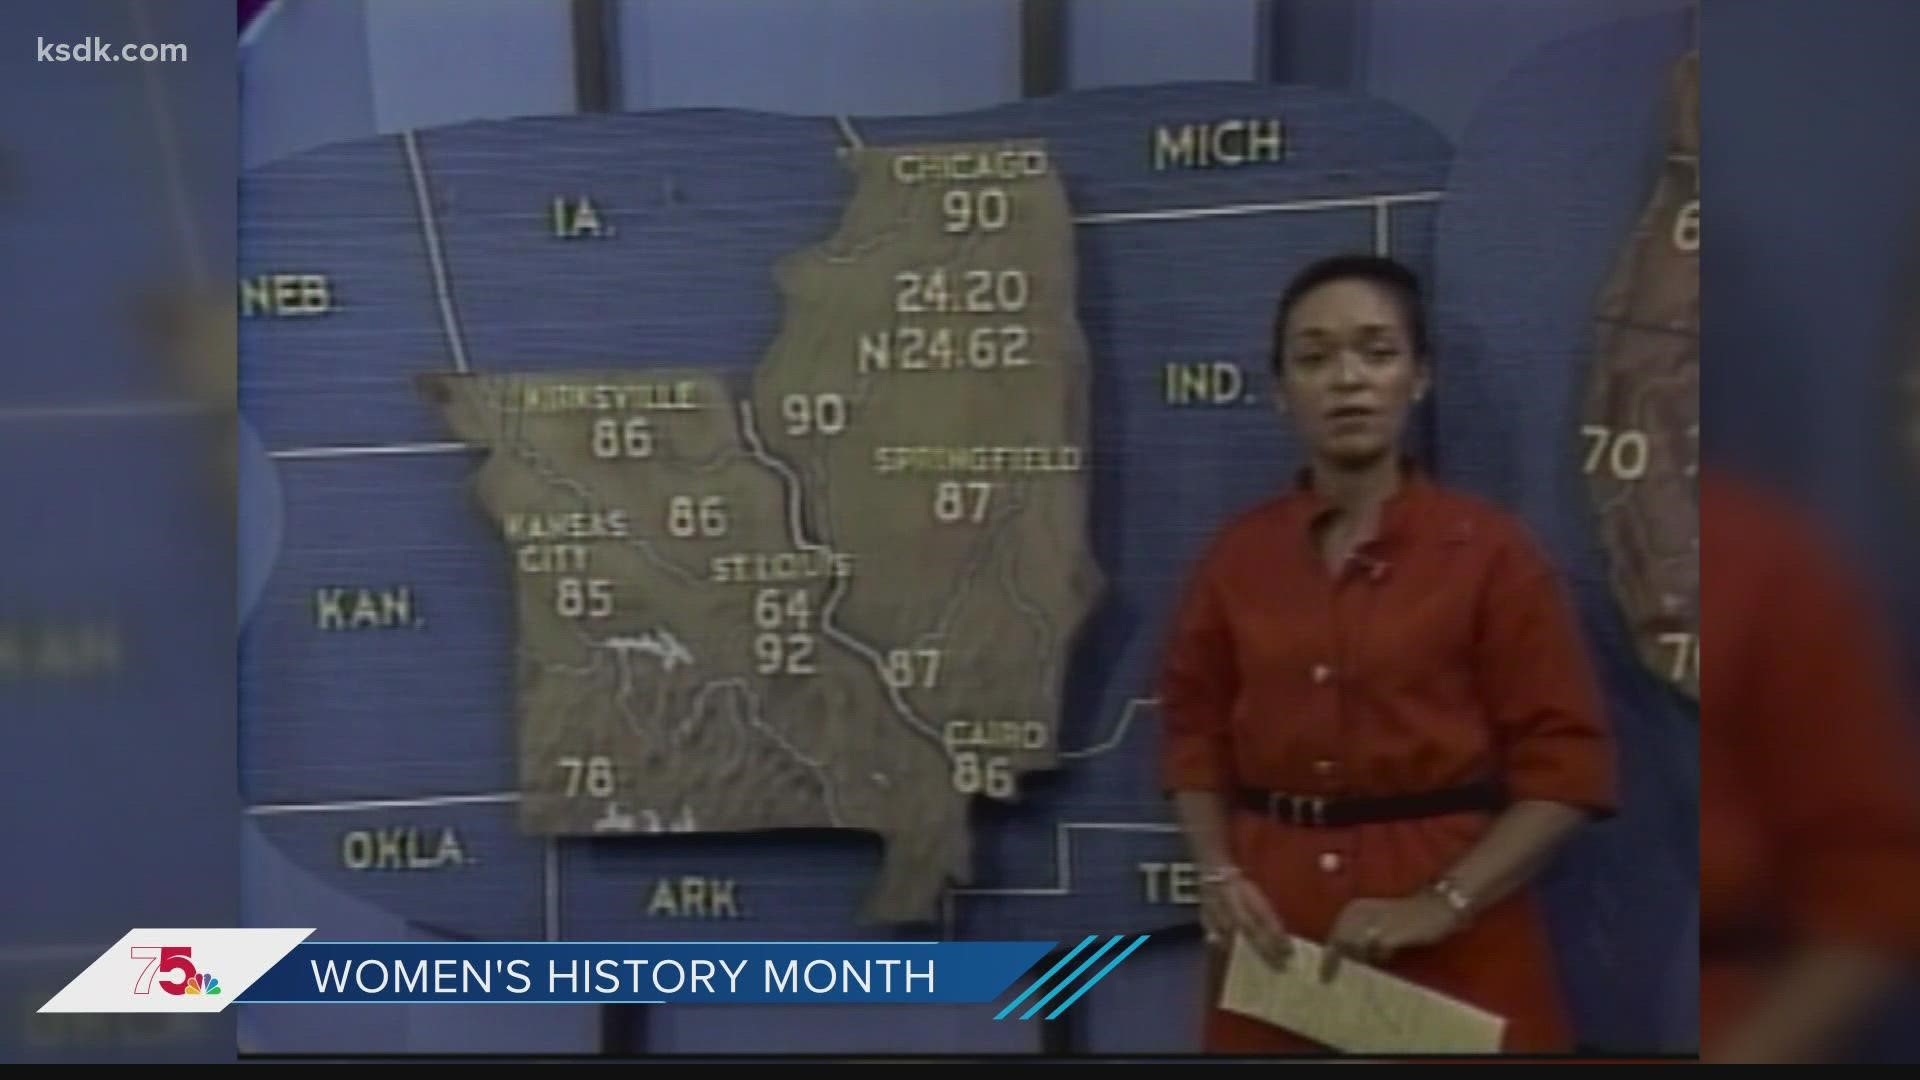 Over the last 75 years, KSDK has had no shortage of amazing women breaking barriers, connecting with the community and getting the job done.